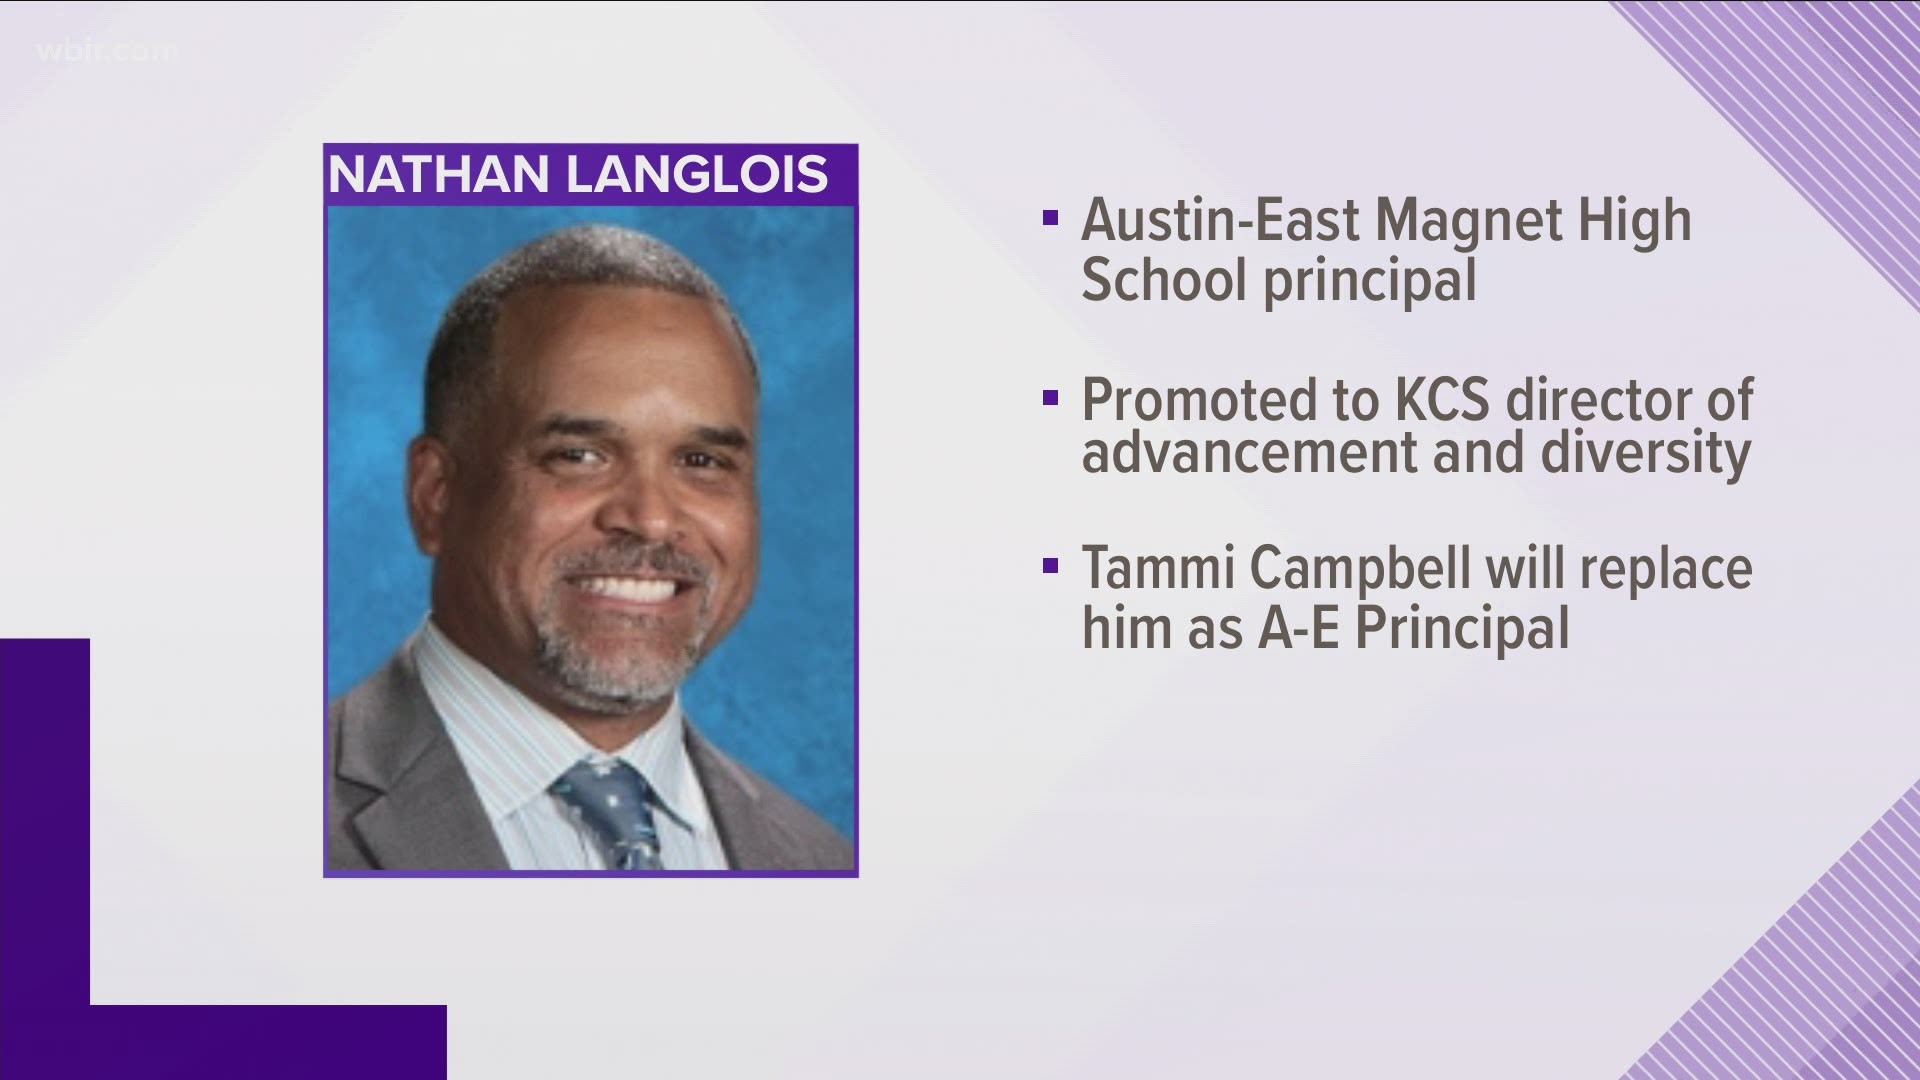 Nathan Langlois is being promoted to the Director of Advancement and Diversity position in Knox County Schools.